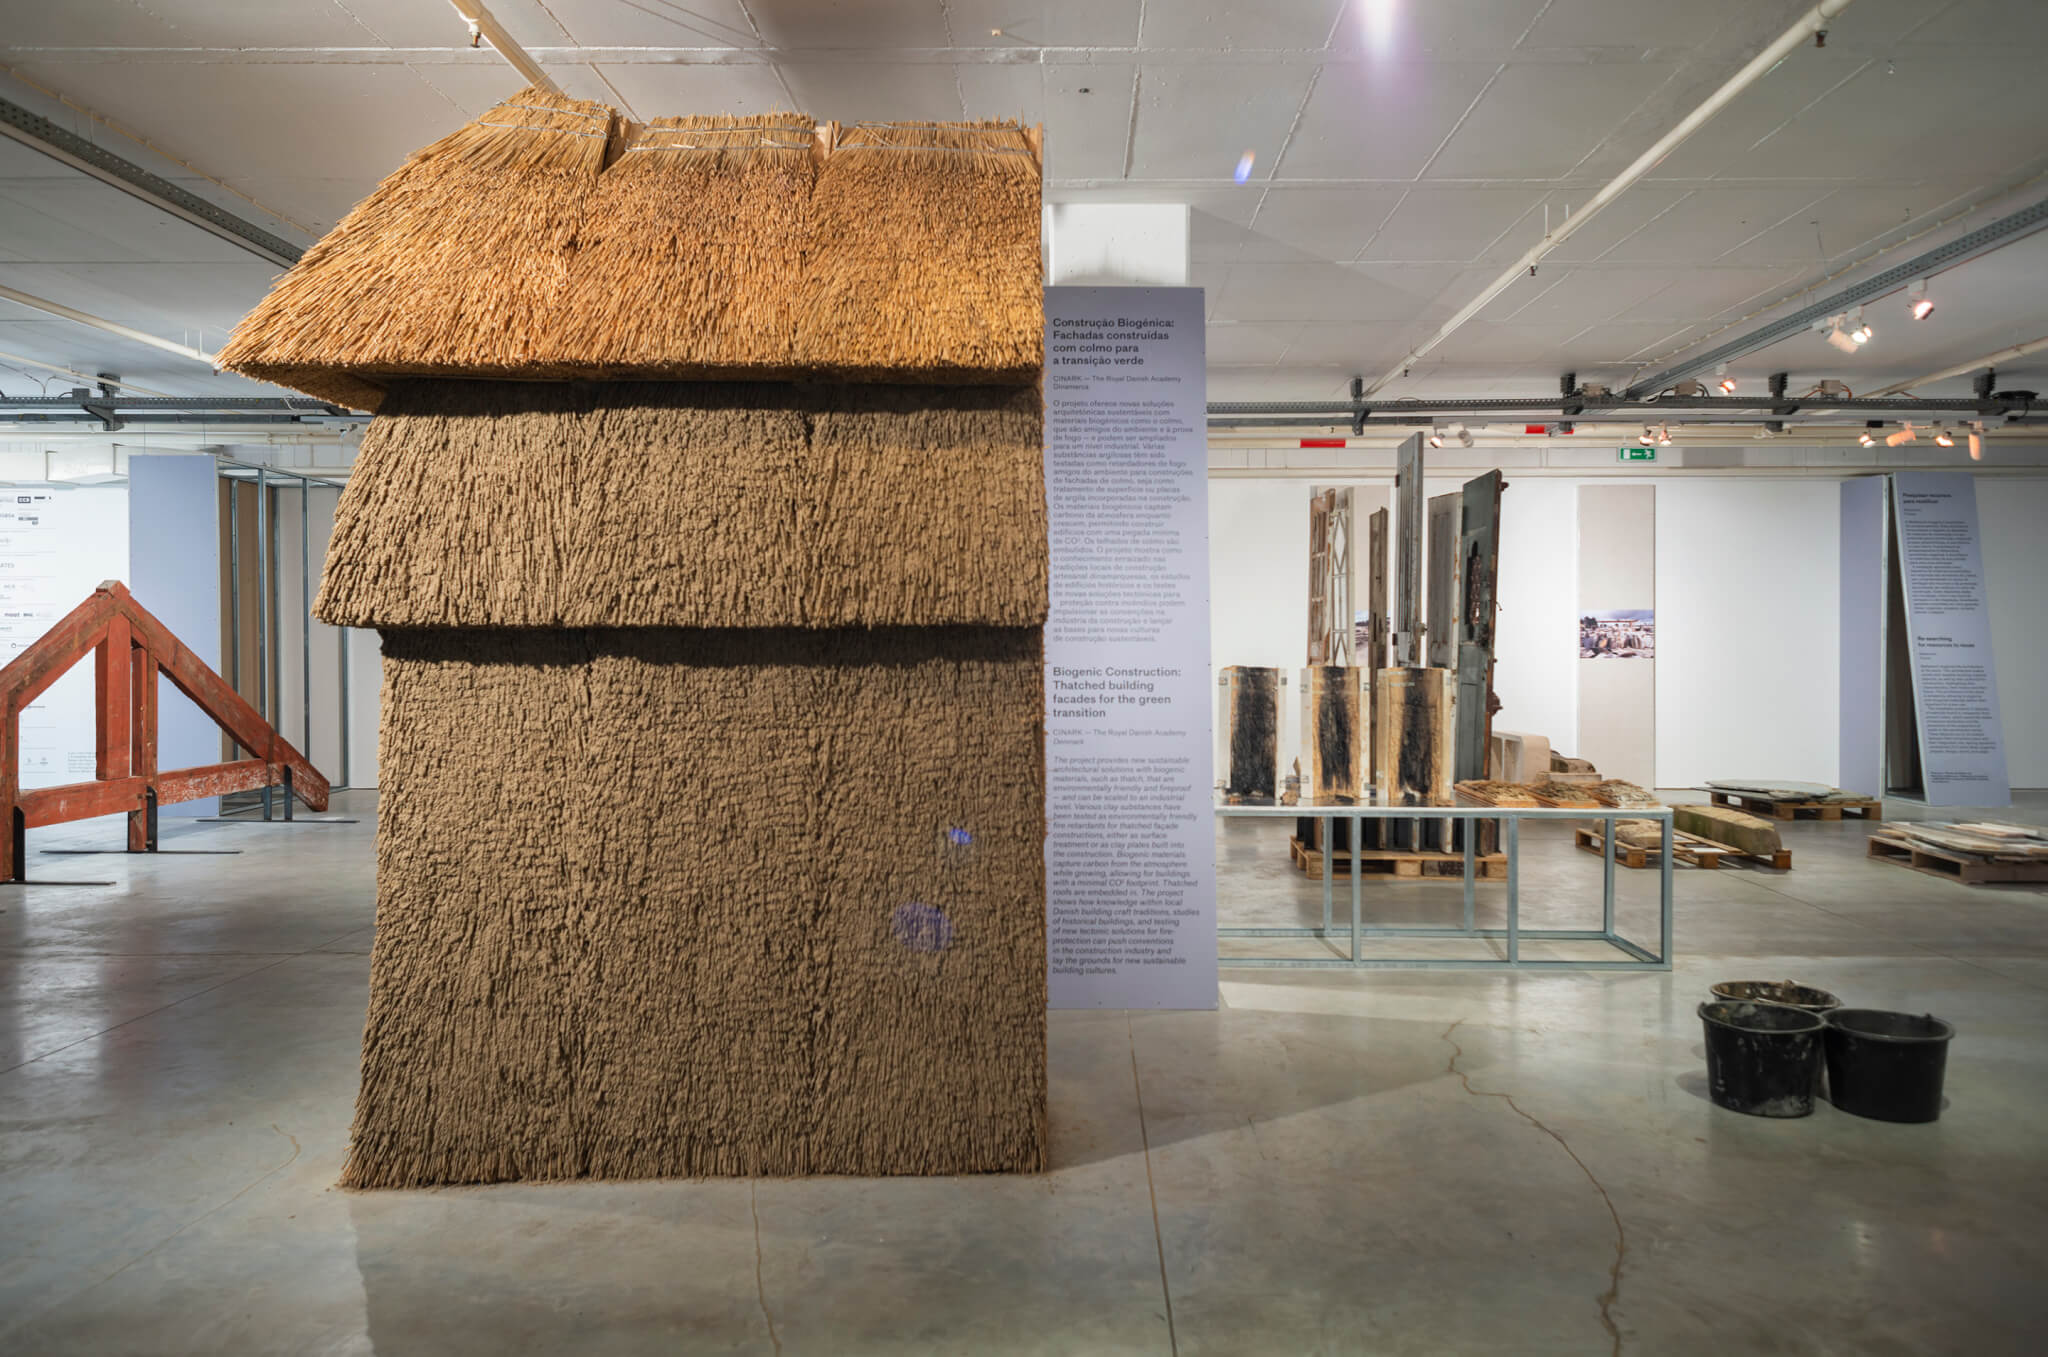 model of building constructed with earthen materials on show in exhibition space